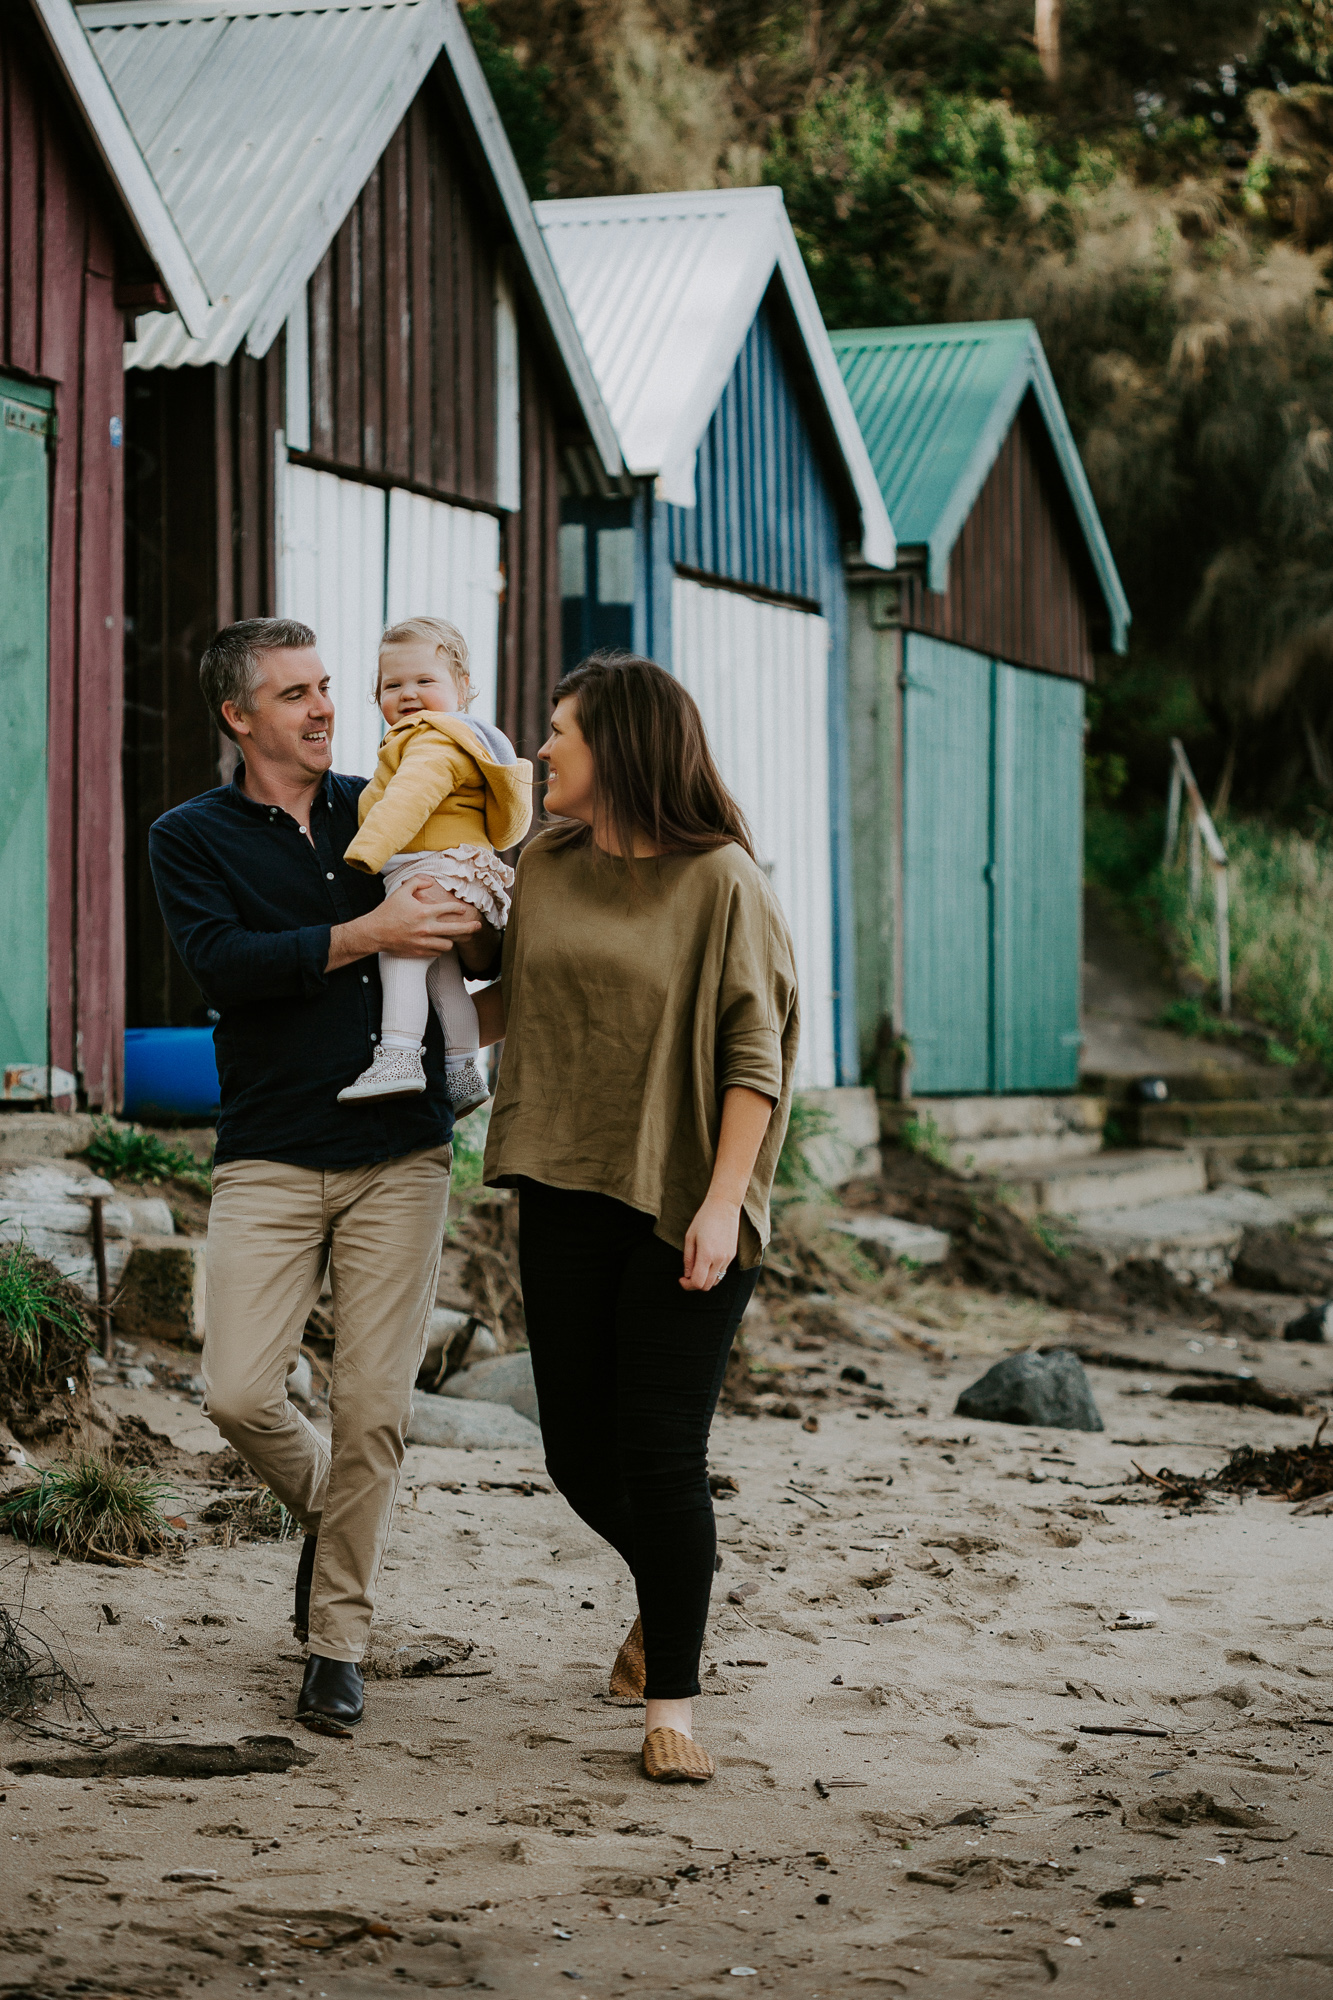 Hinsby Beach Family by Ulla Nordwood – 0001